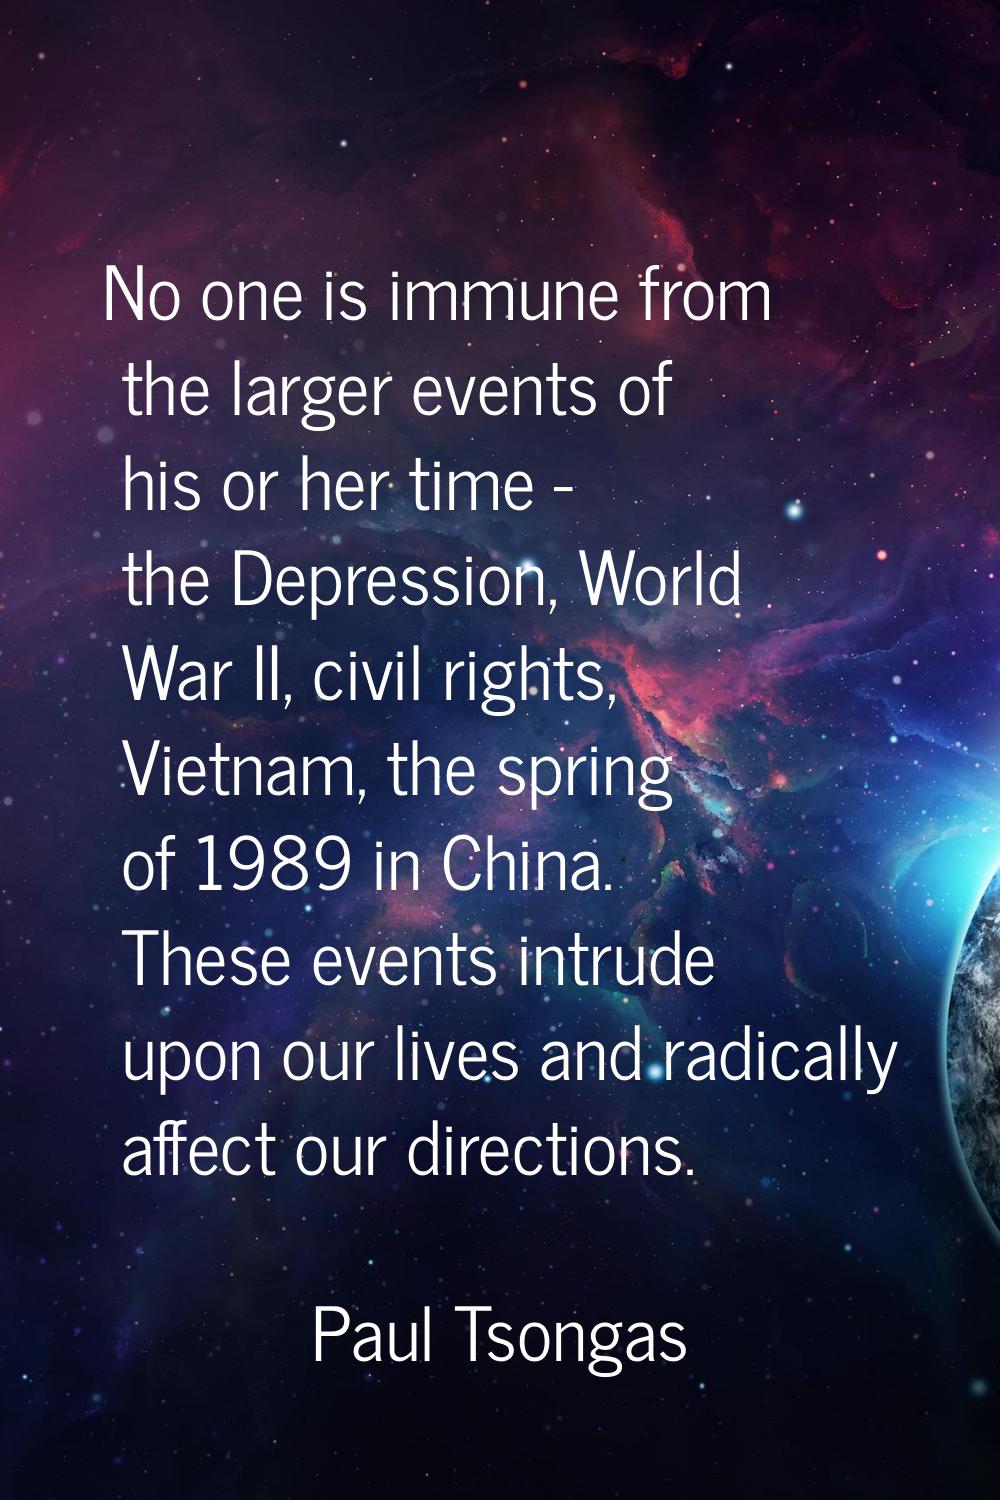 No one is immune from the larger events of his or her time - the Depression, World War II, civil ri